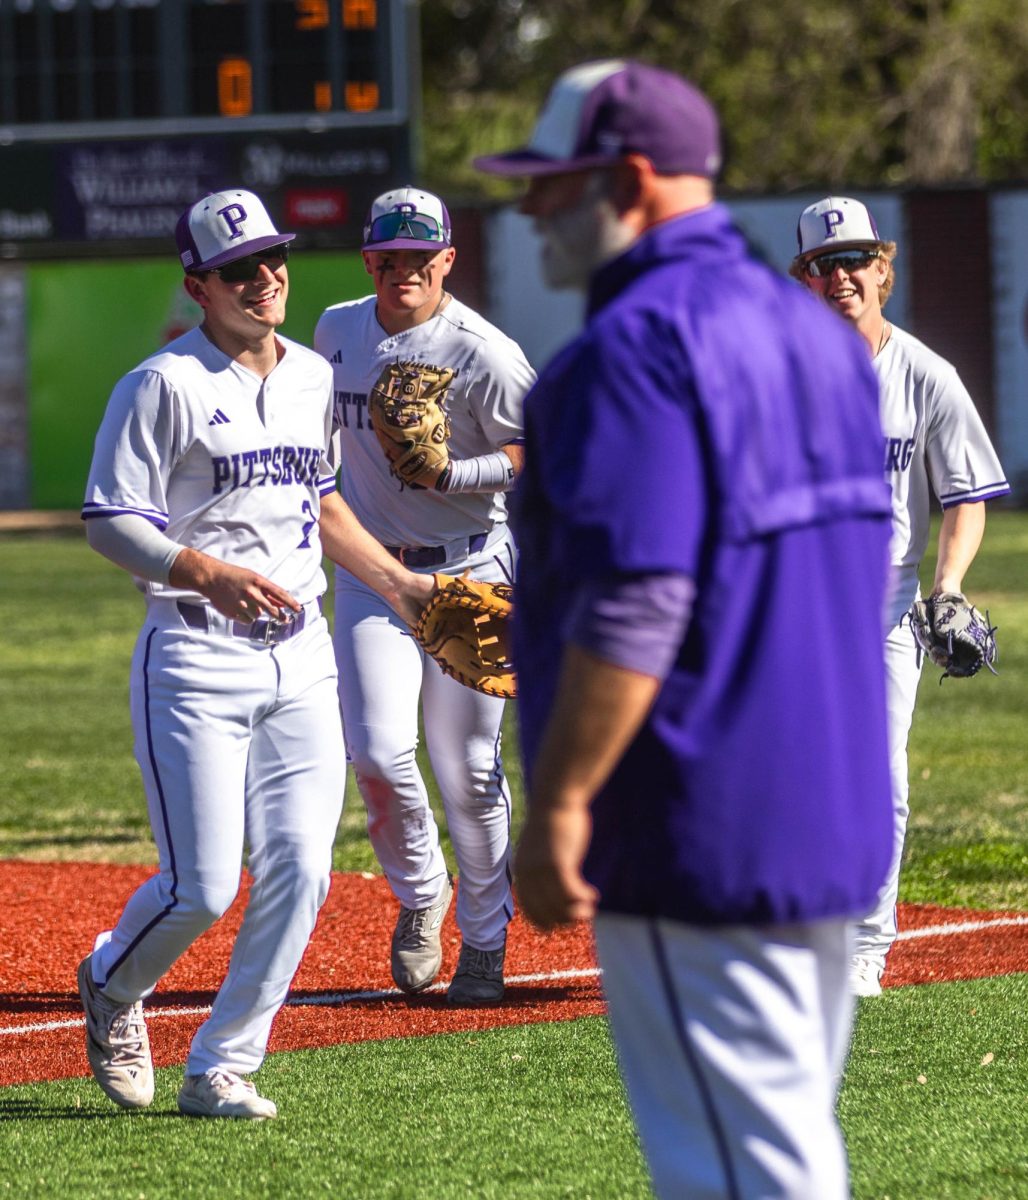 Seniors Grant ODoherty, Tucker Akins, and Parker Johnston run back to the dugout to have a team discussion with Head Coach Eric Miller after a throw to first to get the third out of the inning.